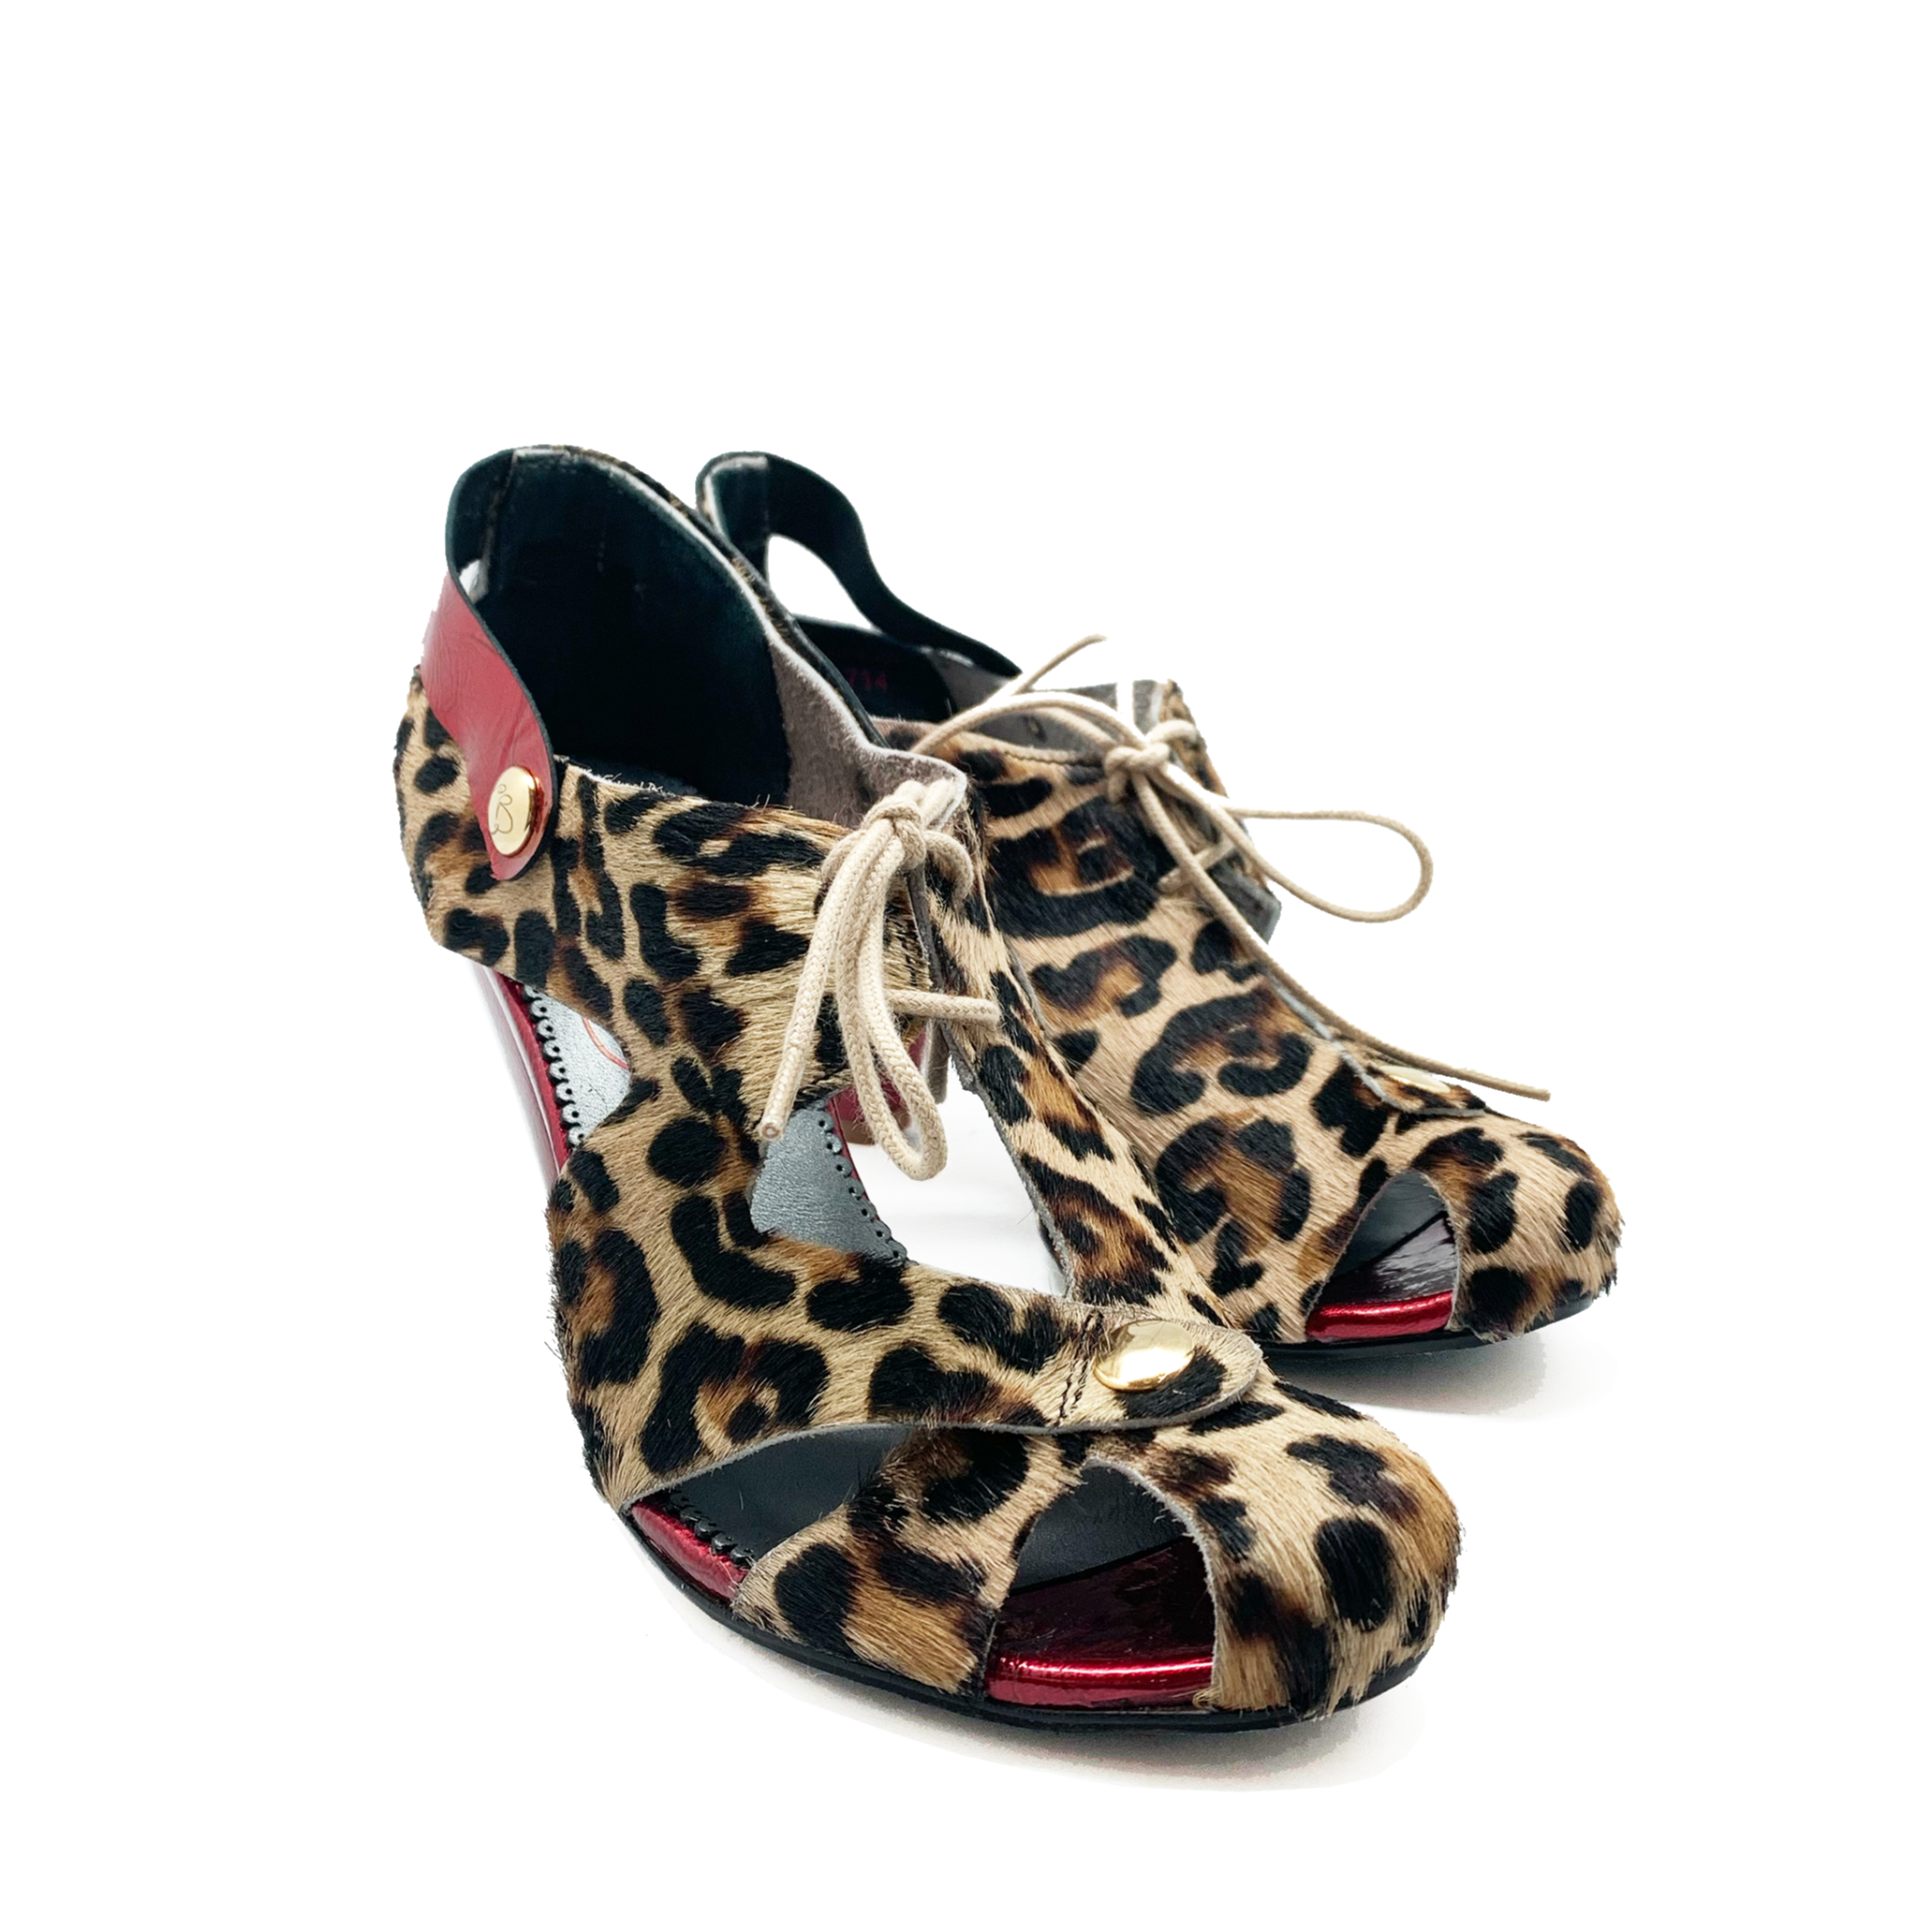 Coco-Leopard/Red heel sandal - British D'sire